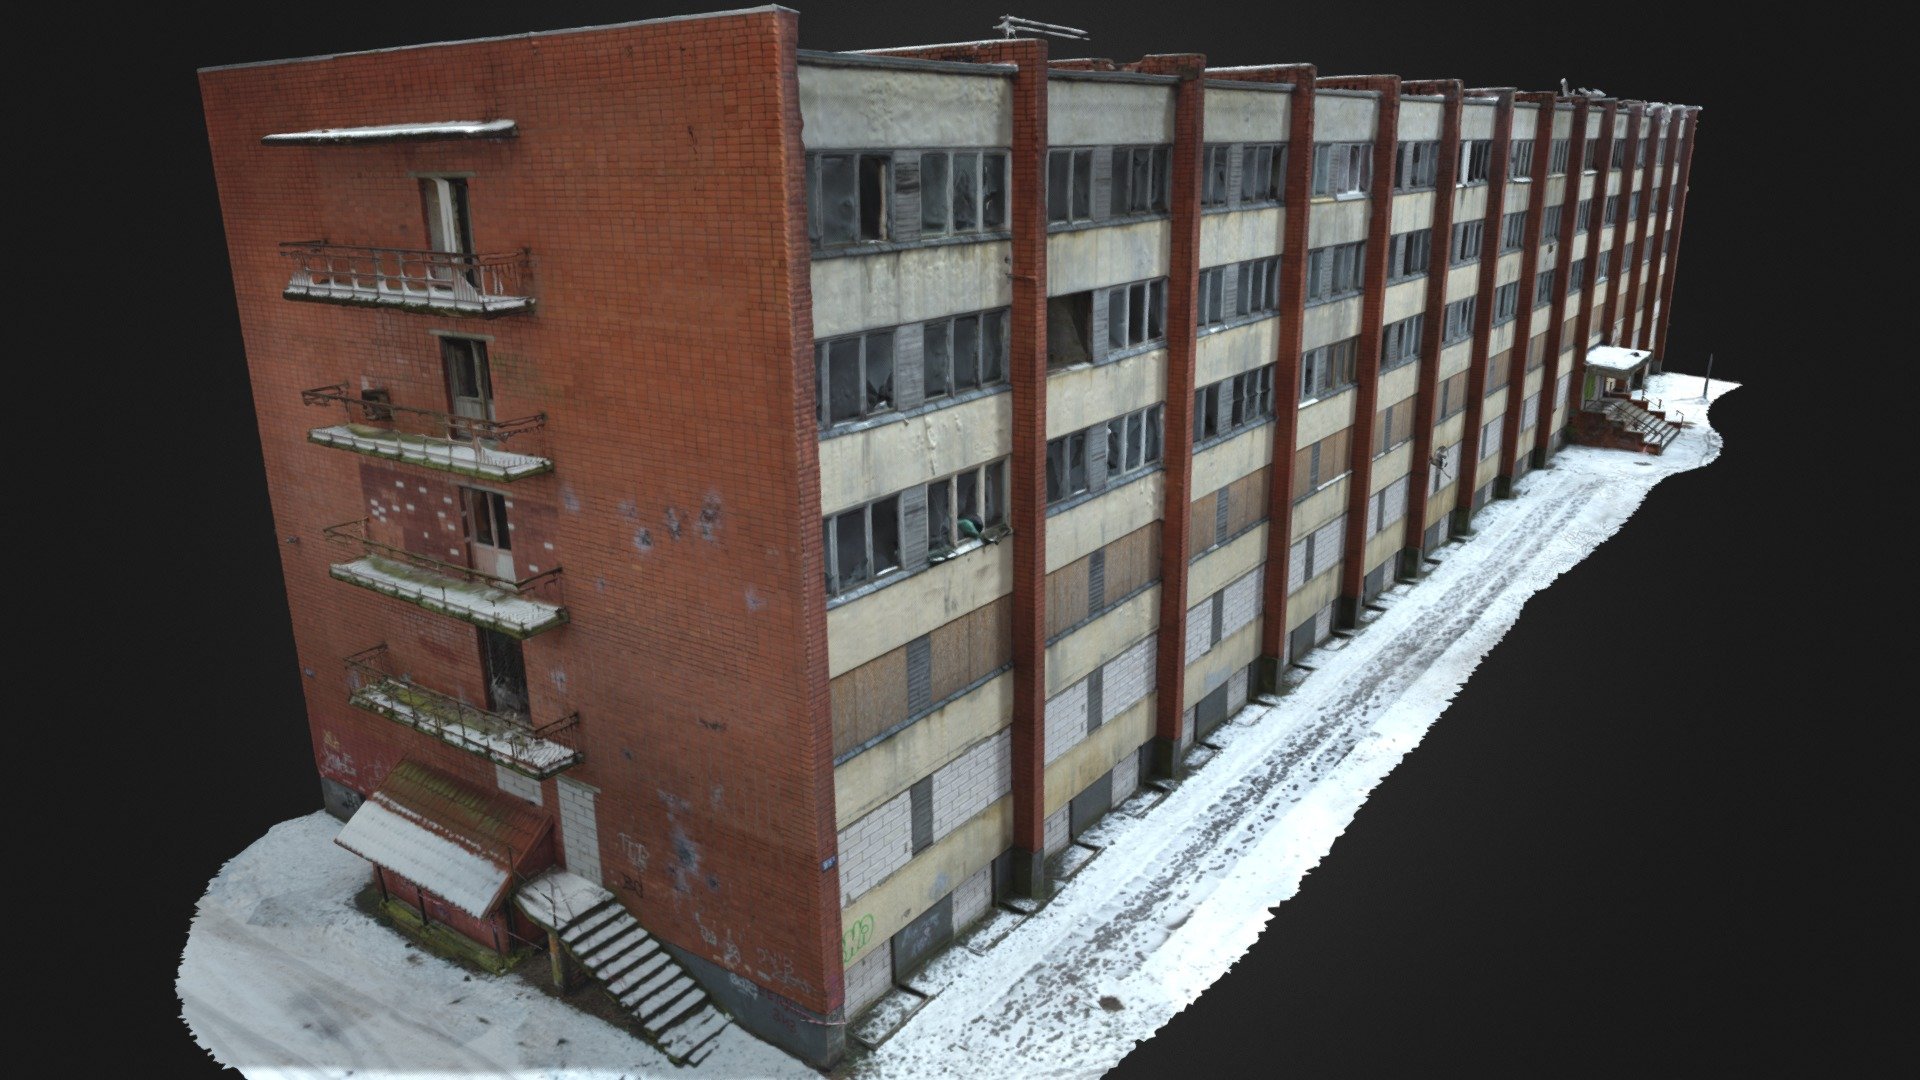 3D scan of an abandoned apartment building in Riga, Latvia. 

Red bricks, broken windows, first floors are blocked off with concrete blocks 3d model